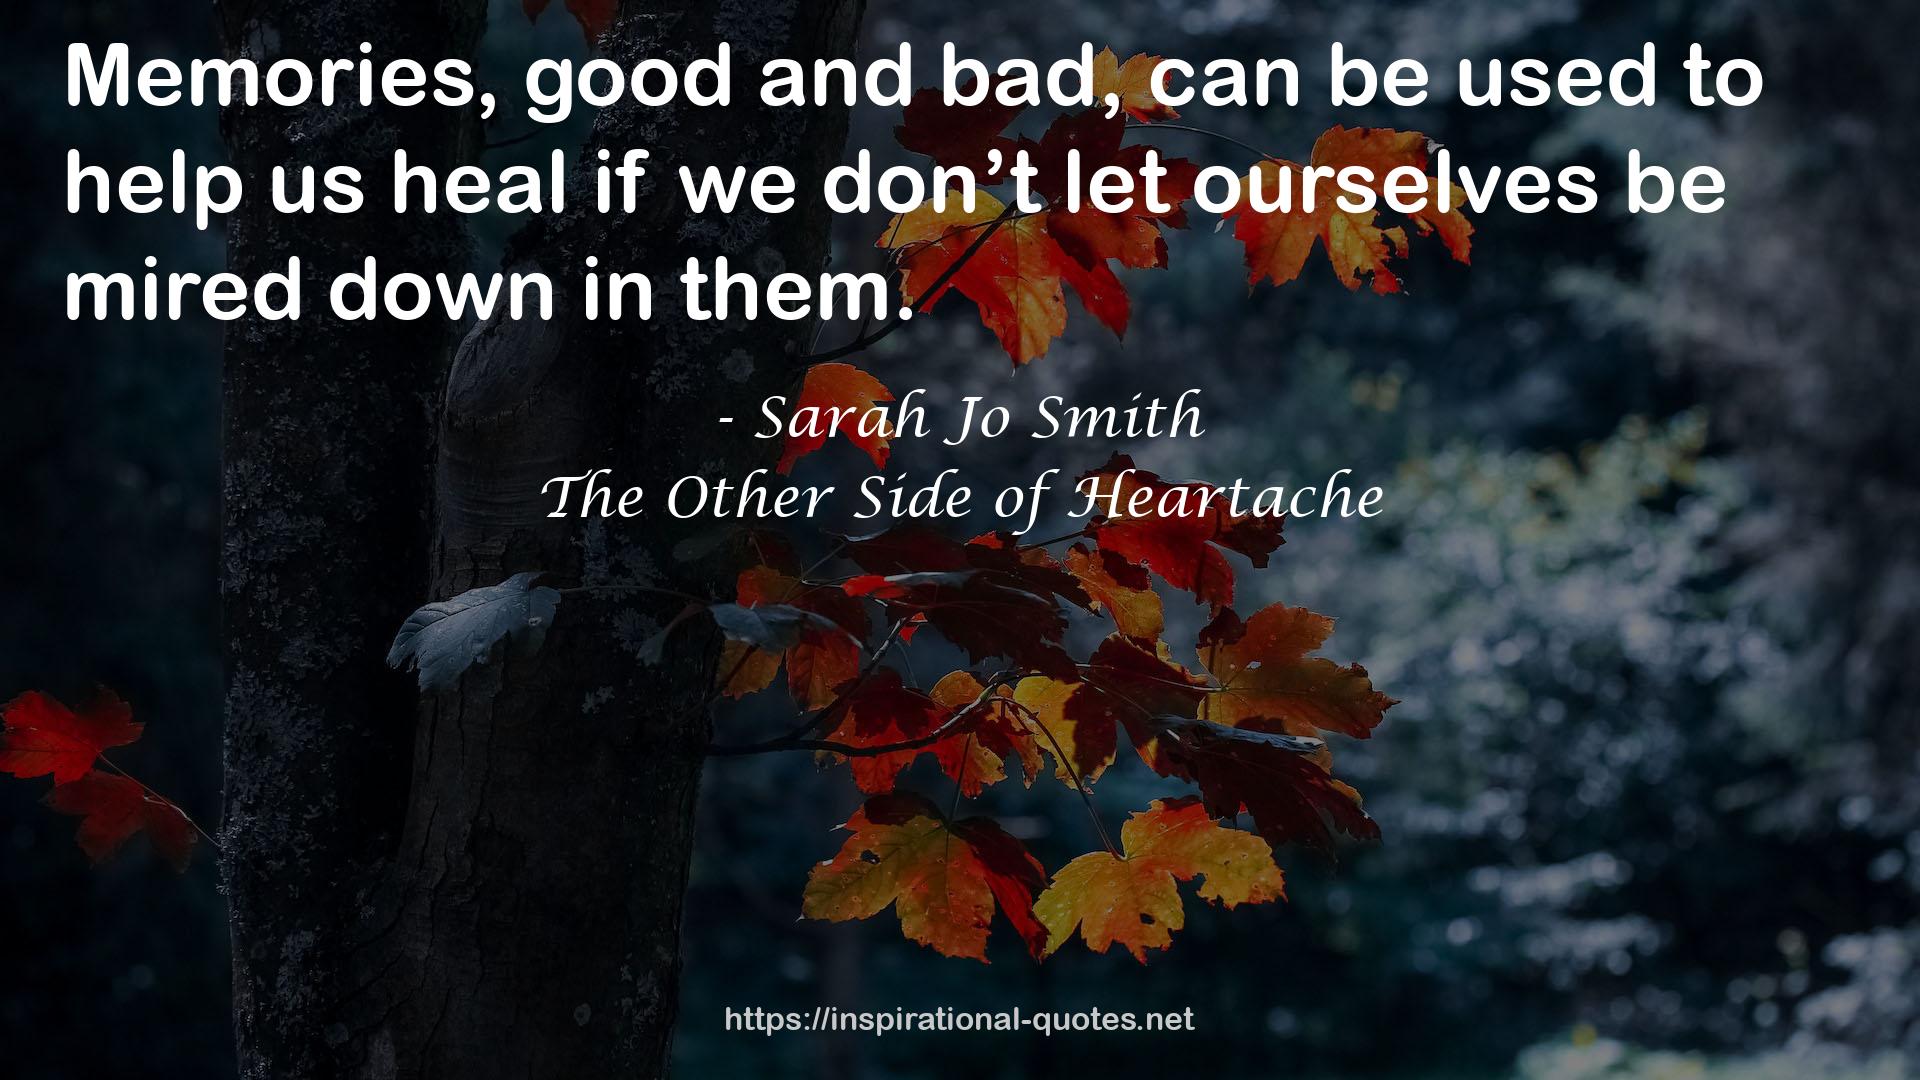 The Other Side of Heartache QUOTES